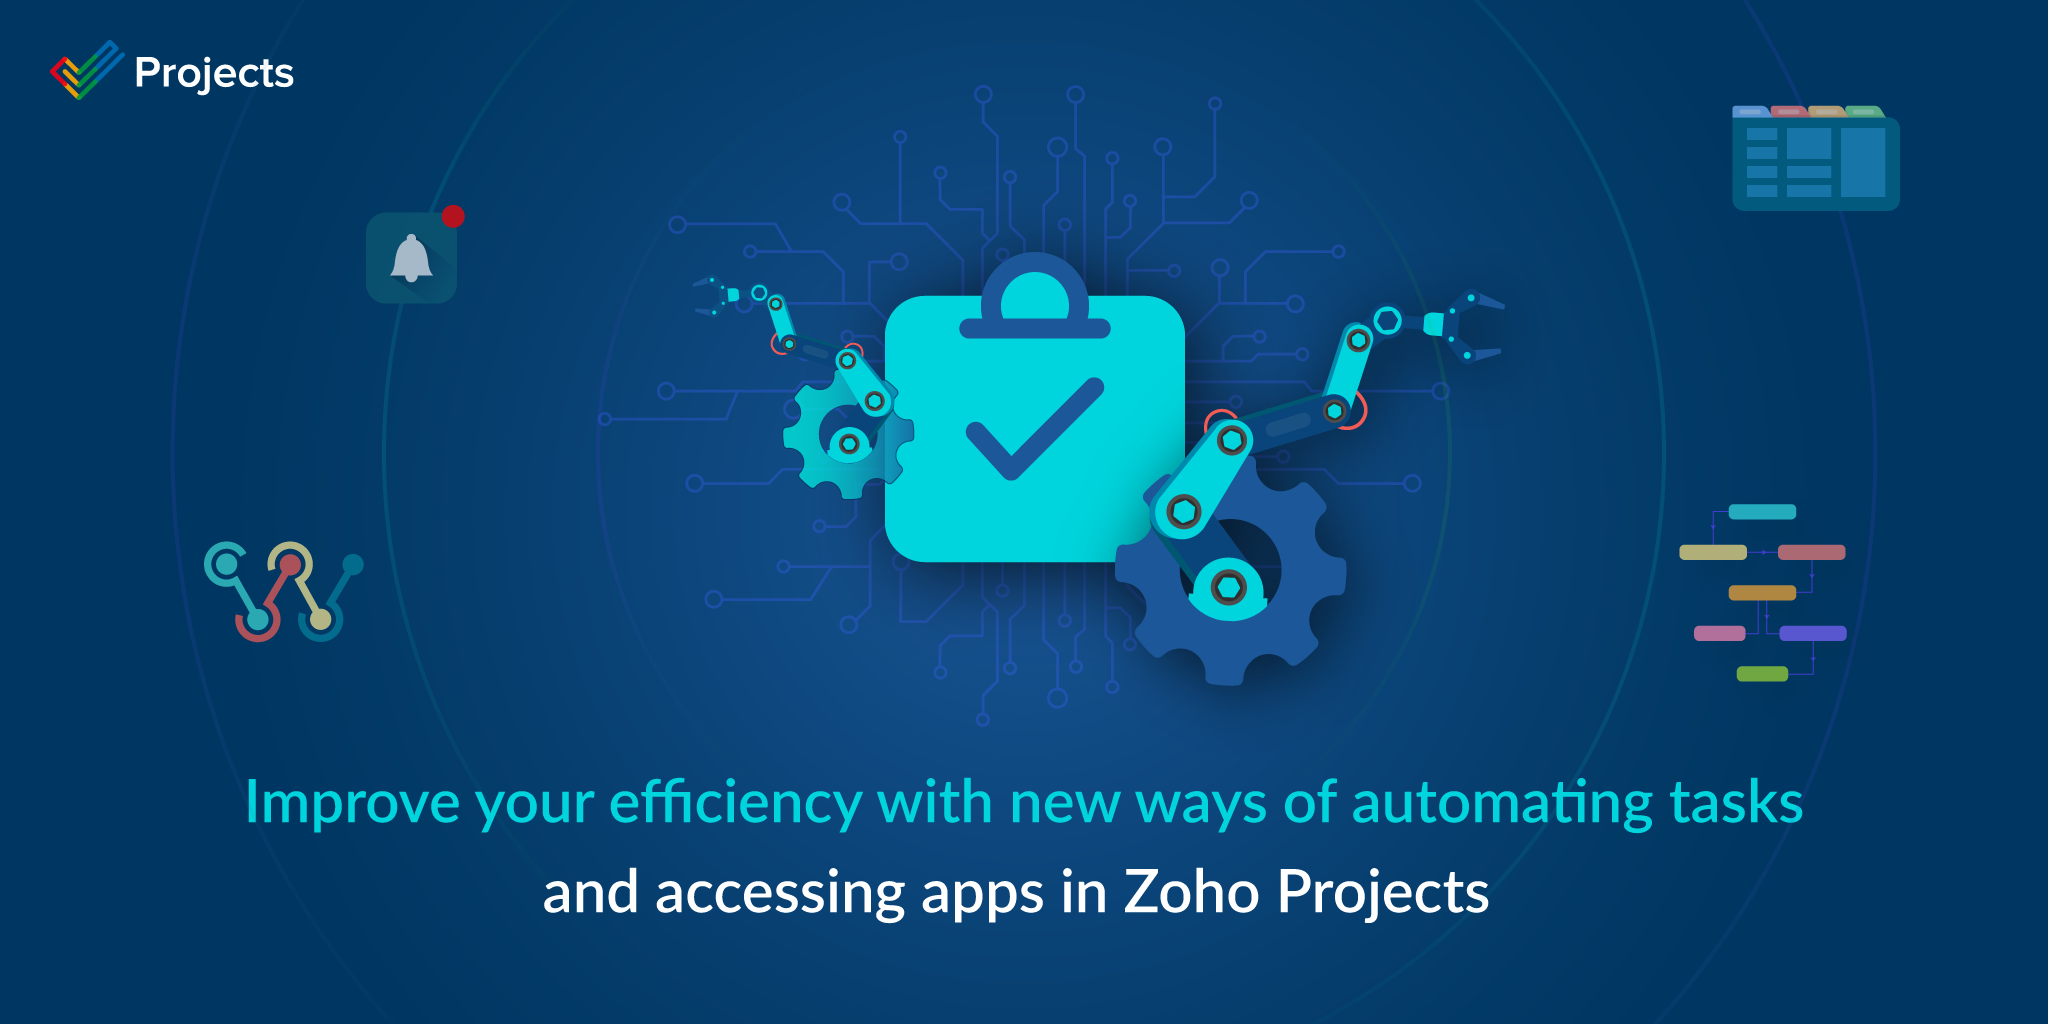 Improve your efficiency with new ways of automating tasks and accessing apps in Zoho Projects